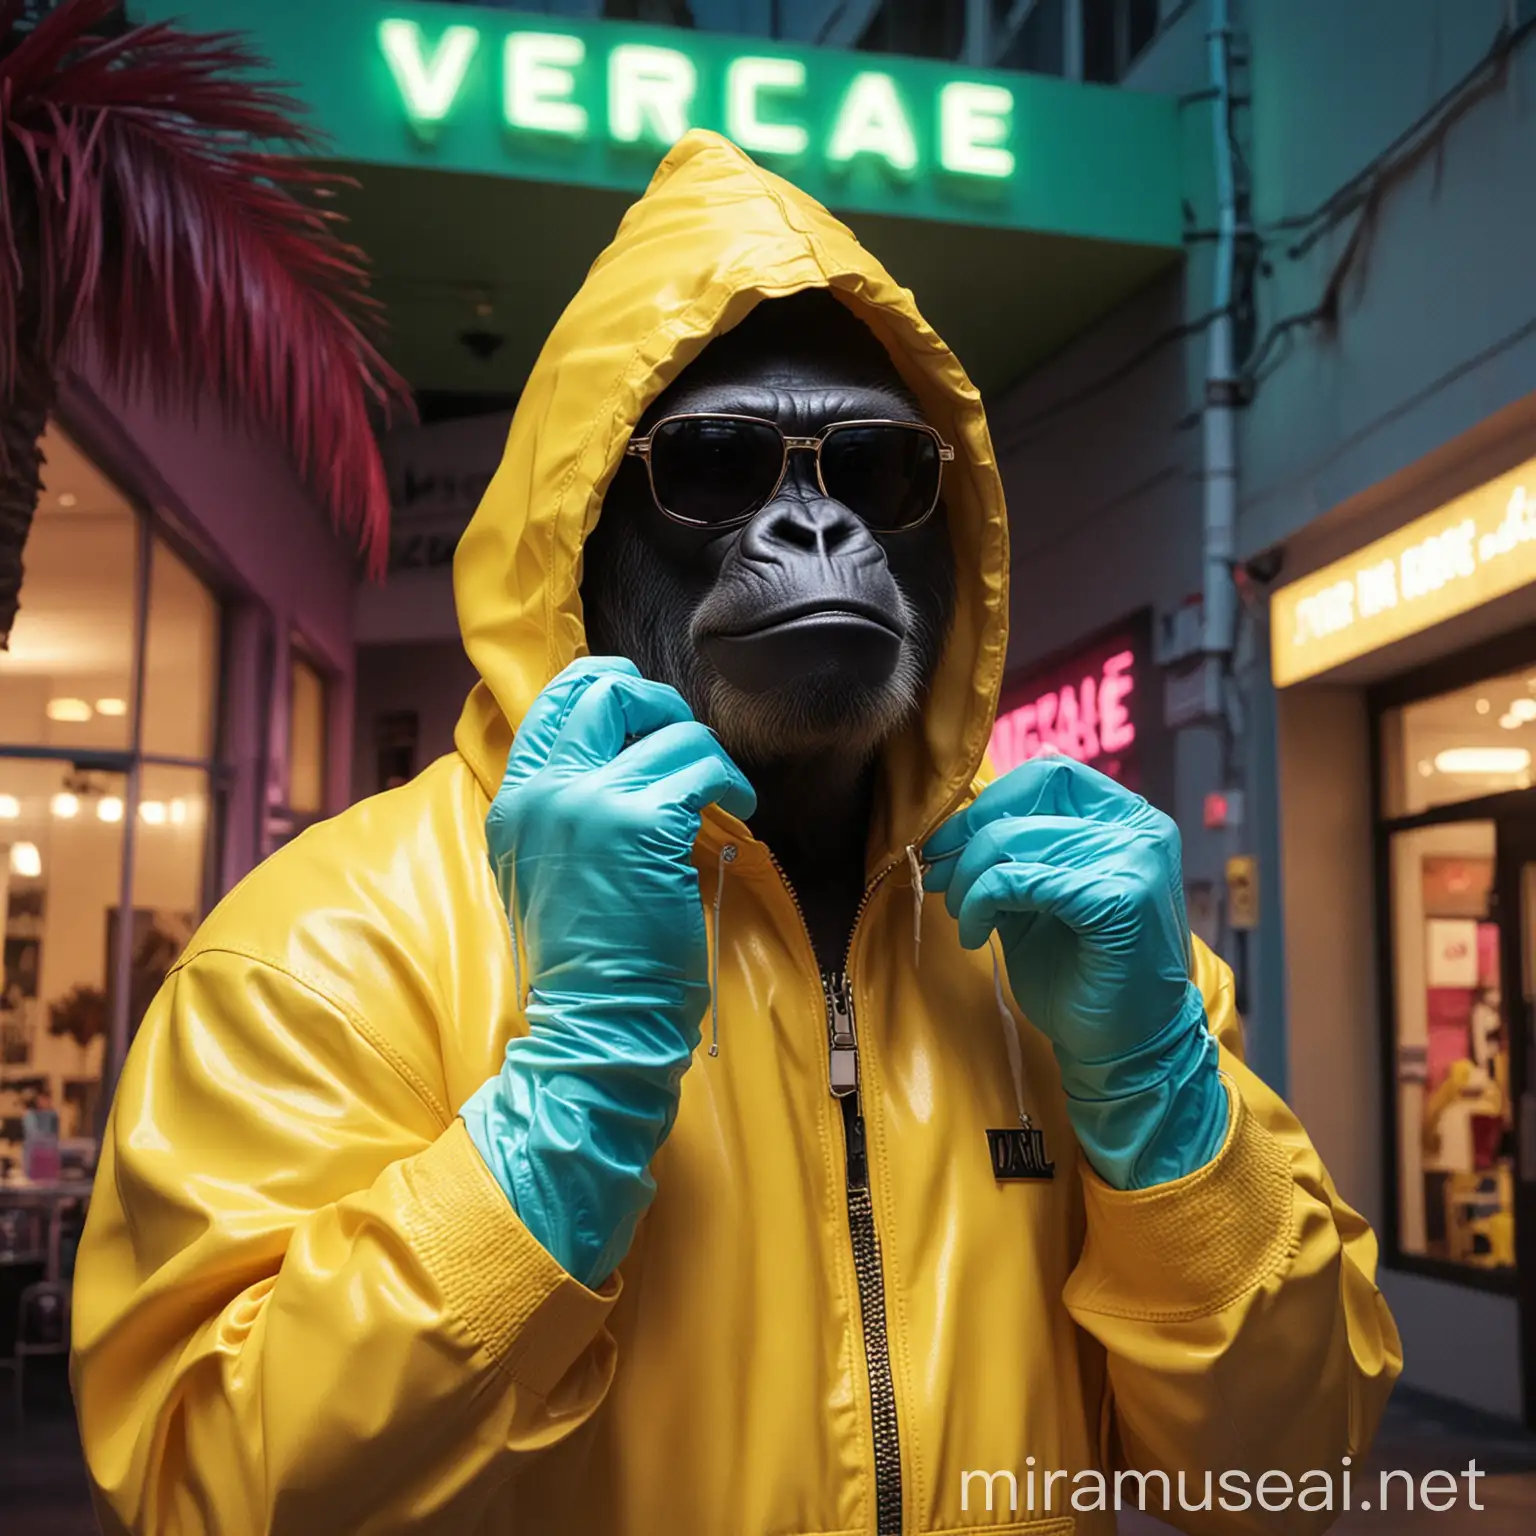 The gorilla is in Miami, it's night, and there's art deco architecture with green and pink neon lights   illuminating the area. The gorilla wears dark sunglasses and a YELLOW COLOR jumpsuit like the one in the Breaking Bad series. His head is covered by the yellow hood. His hands are covered with light blue latex gloves. A pink neon sign advertises the VERSACE brand behind him.  His clothes are yellow.  Gorila faces the camera, close up with his hand touching his cheek. image looks super cool and realistic badass, low angle